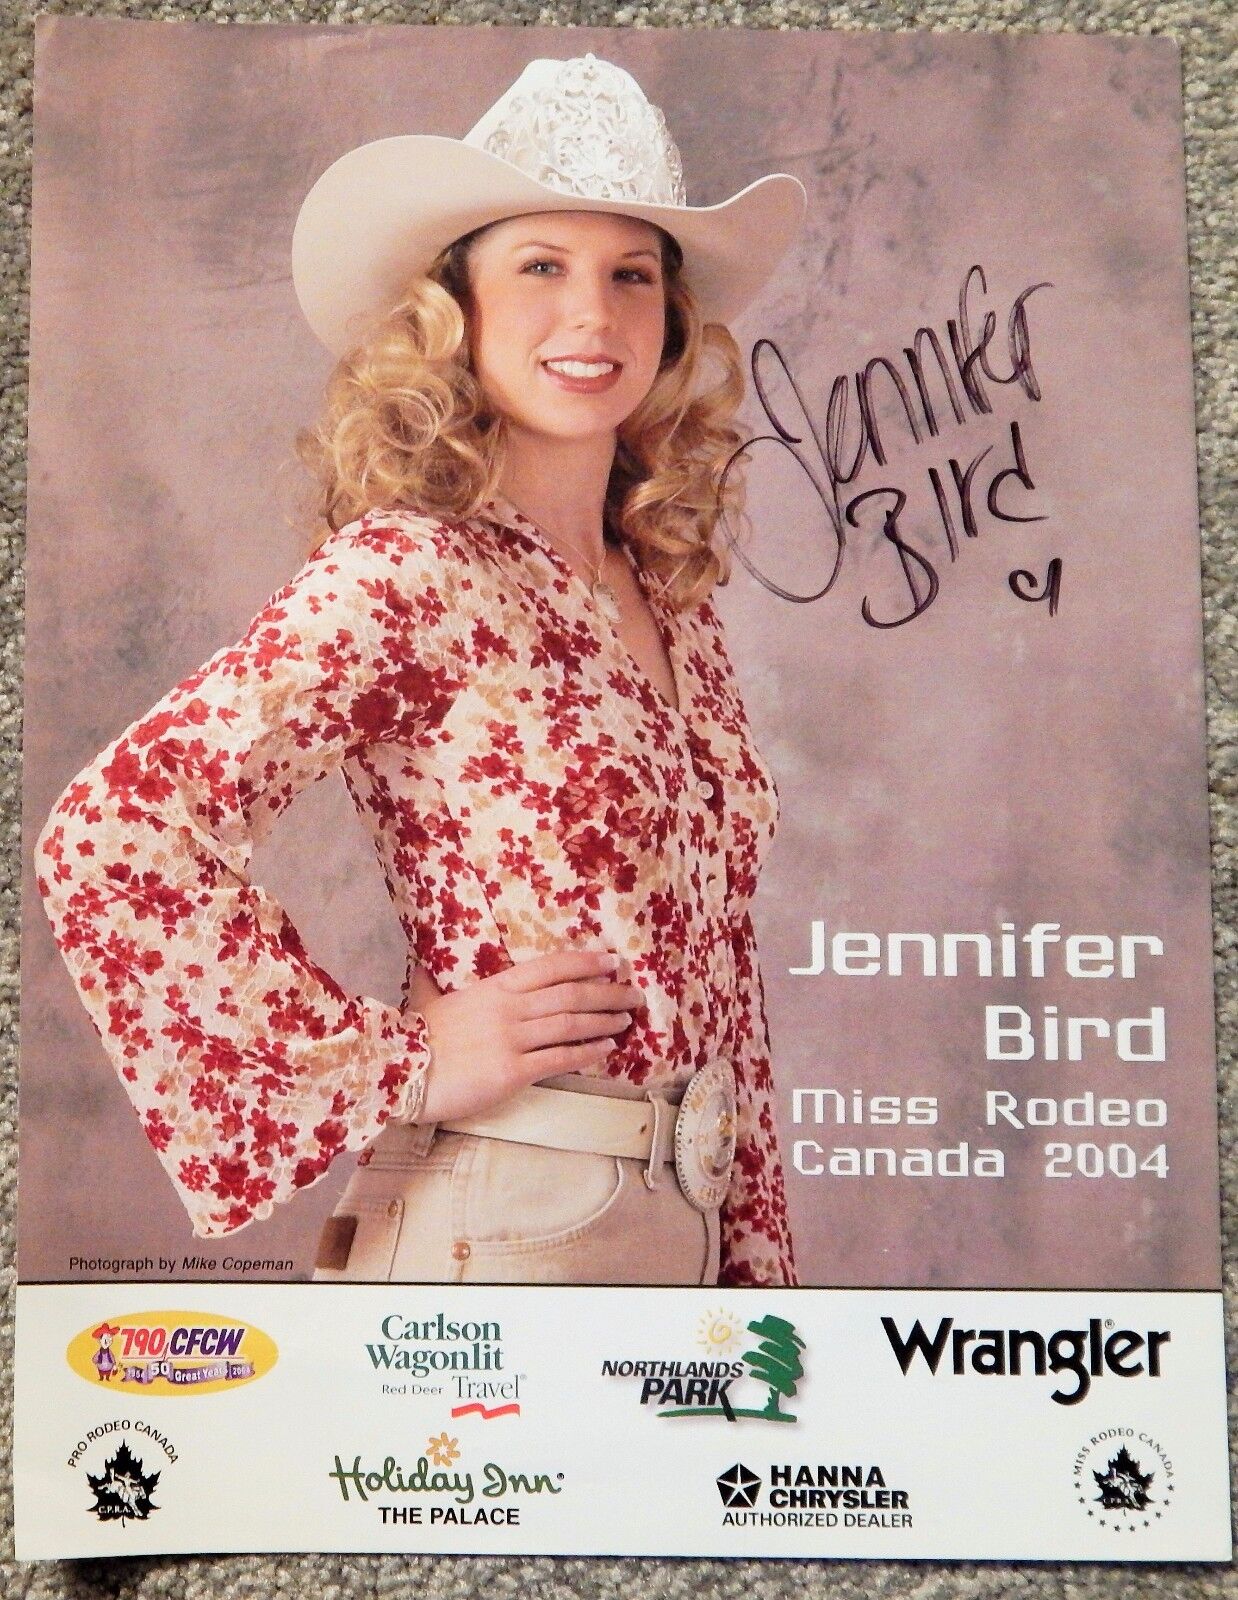 JENNIFER BIRD PERSONAL AUTOGRAPH COLOR Photo Poster painting MISS RODEO CANADA 2004, BEAUTIFUL